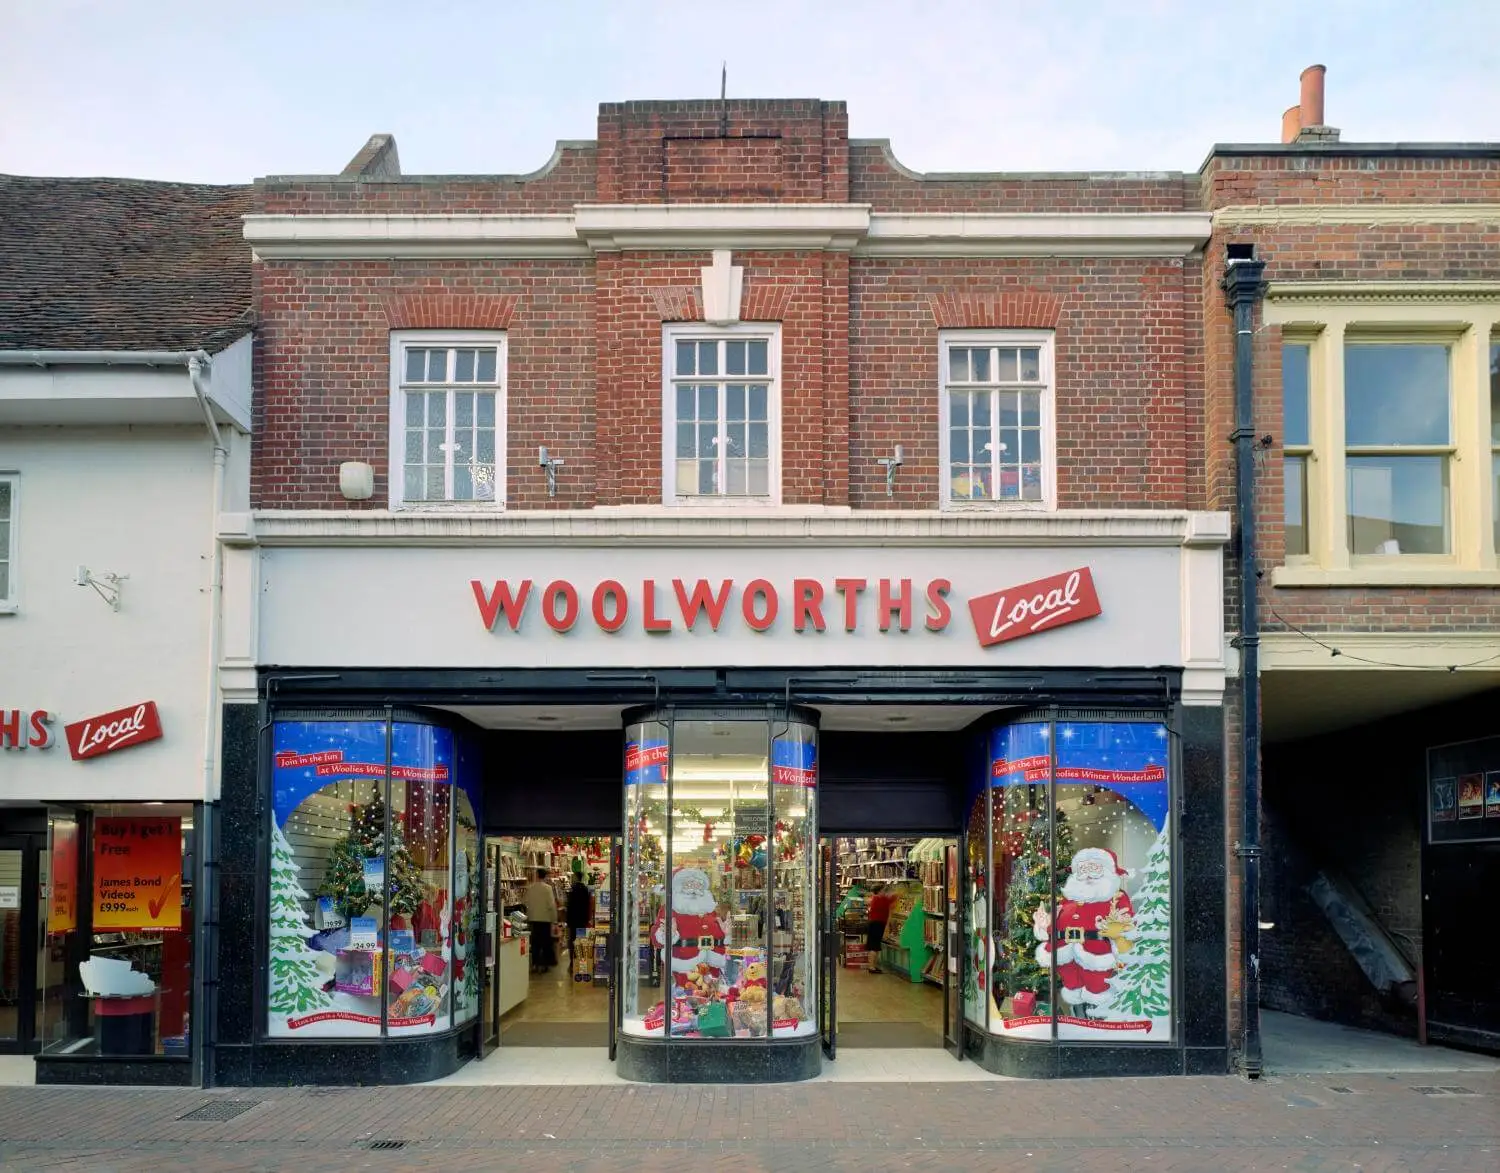 The History of Woolworths and the Amazing Exploits of Members of the Woolworth Family